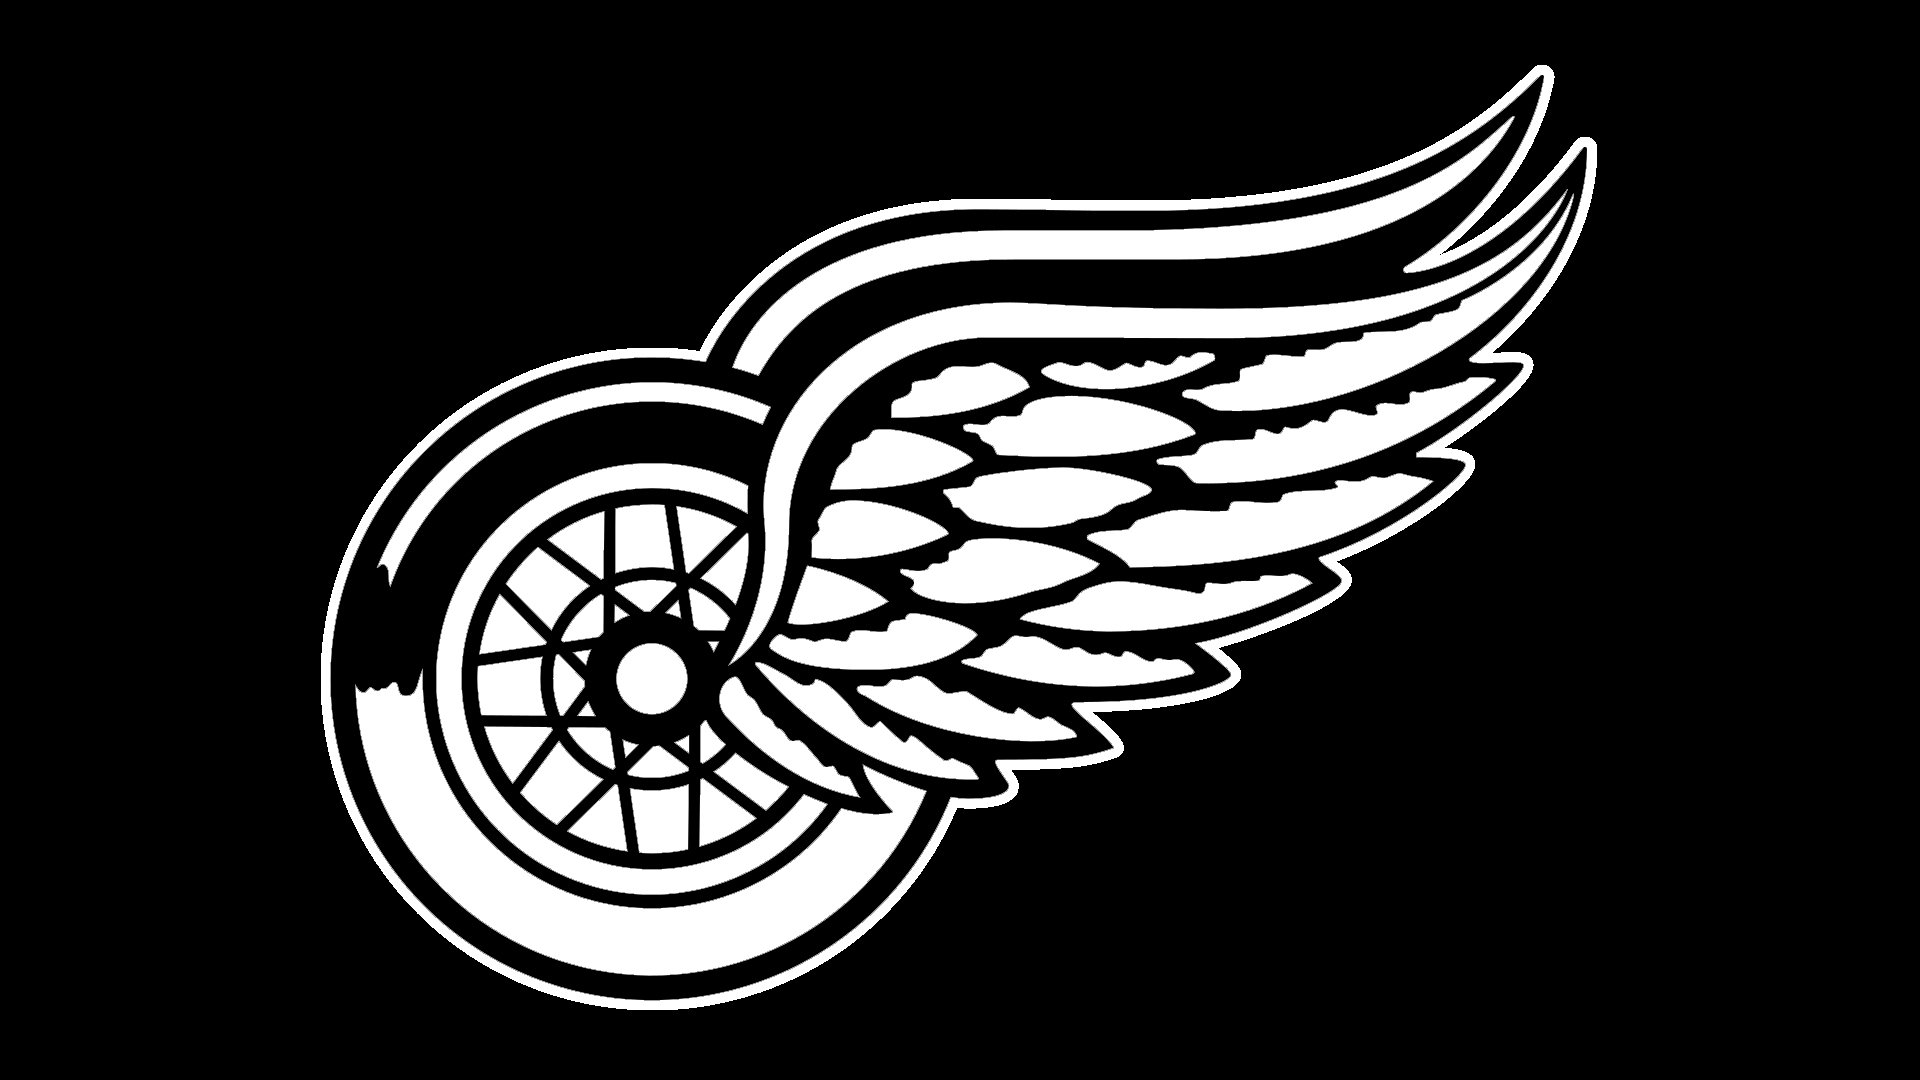 Meaning Detroit Red Wings logo and symbol | history and ...